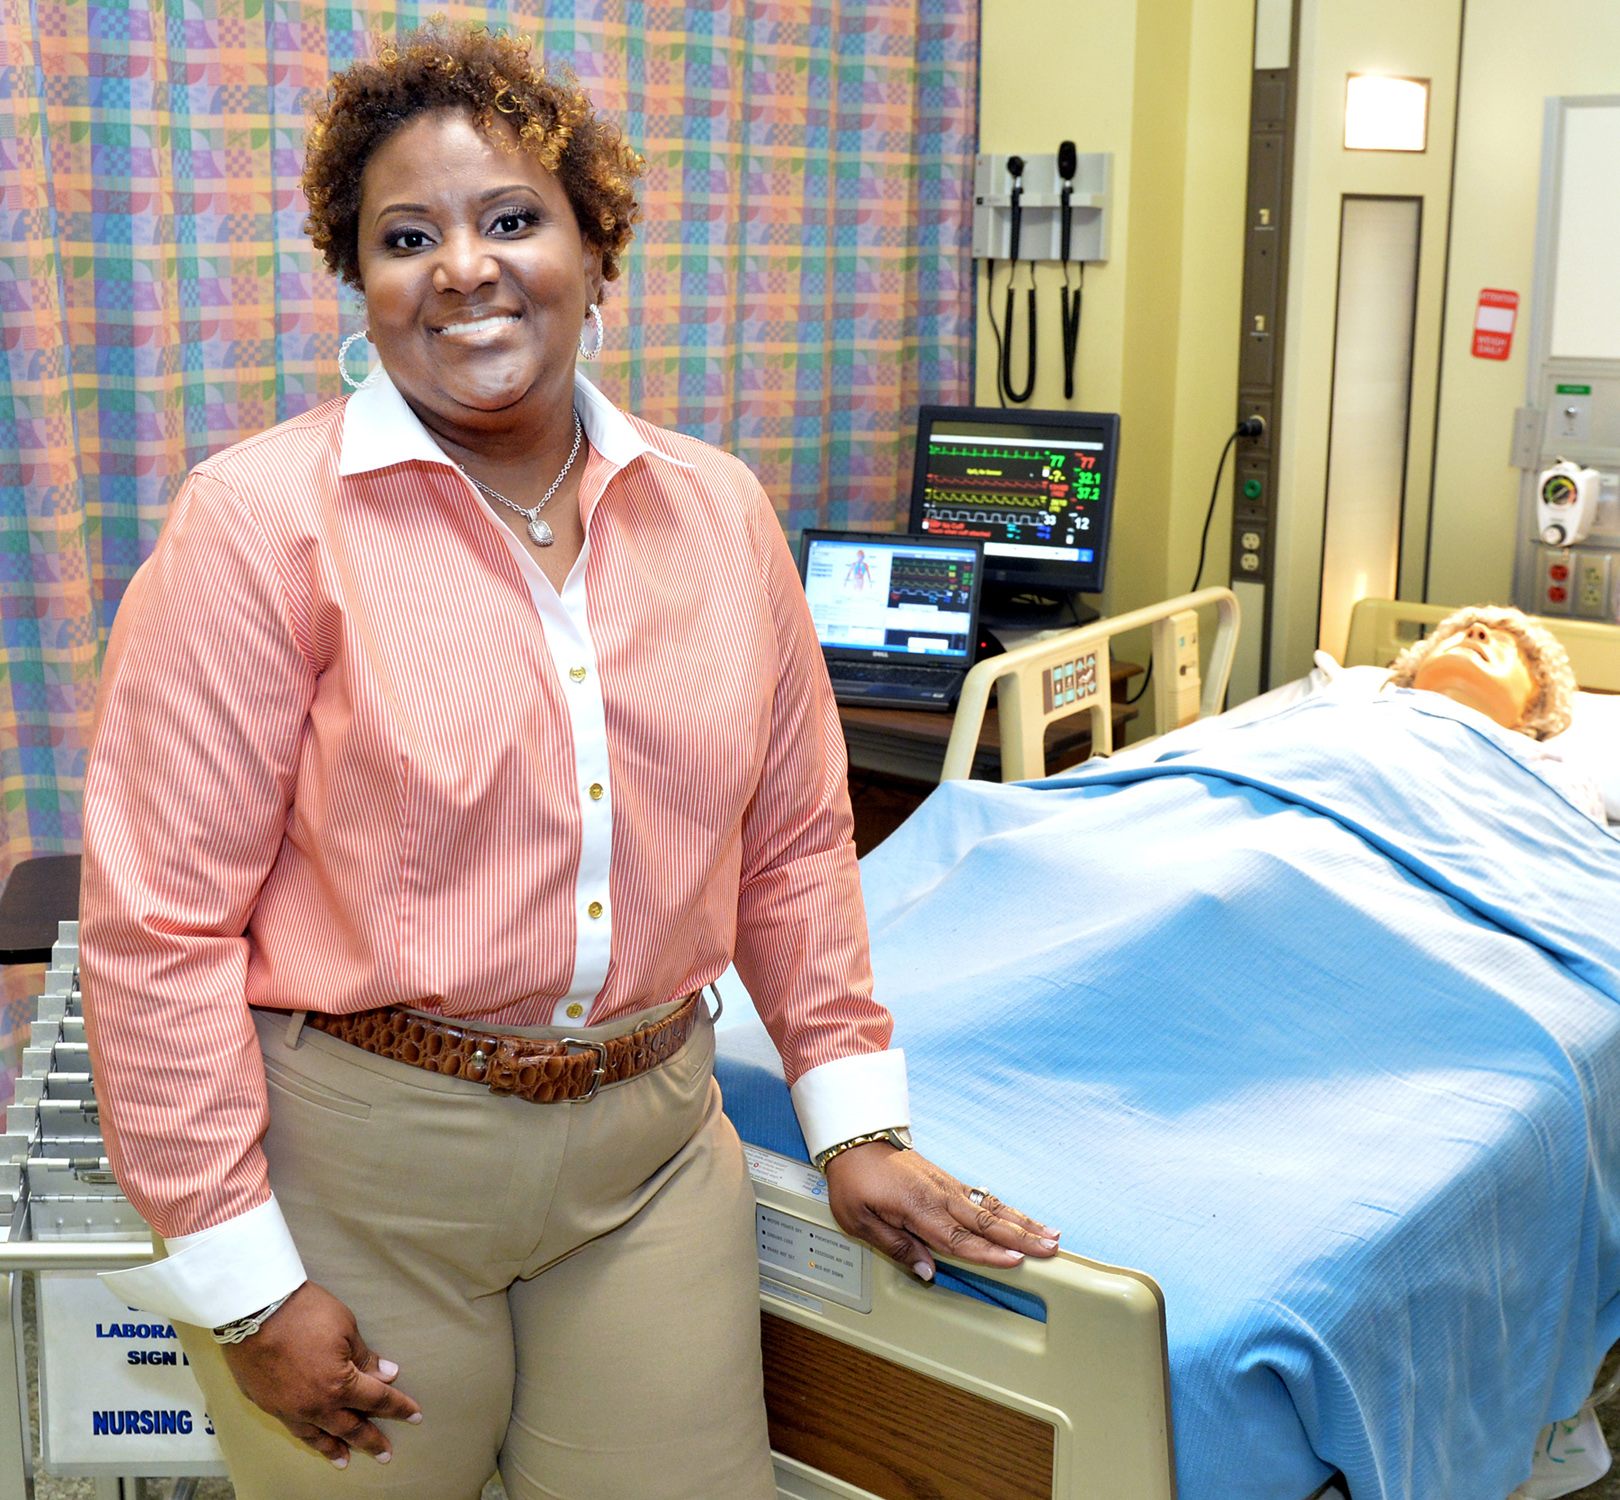 SU nursing professor elected BRDNA vice president | Southern University and A&M College